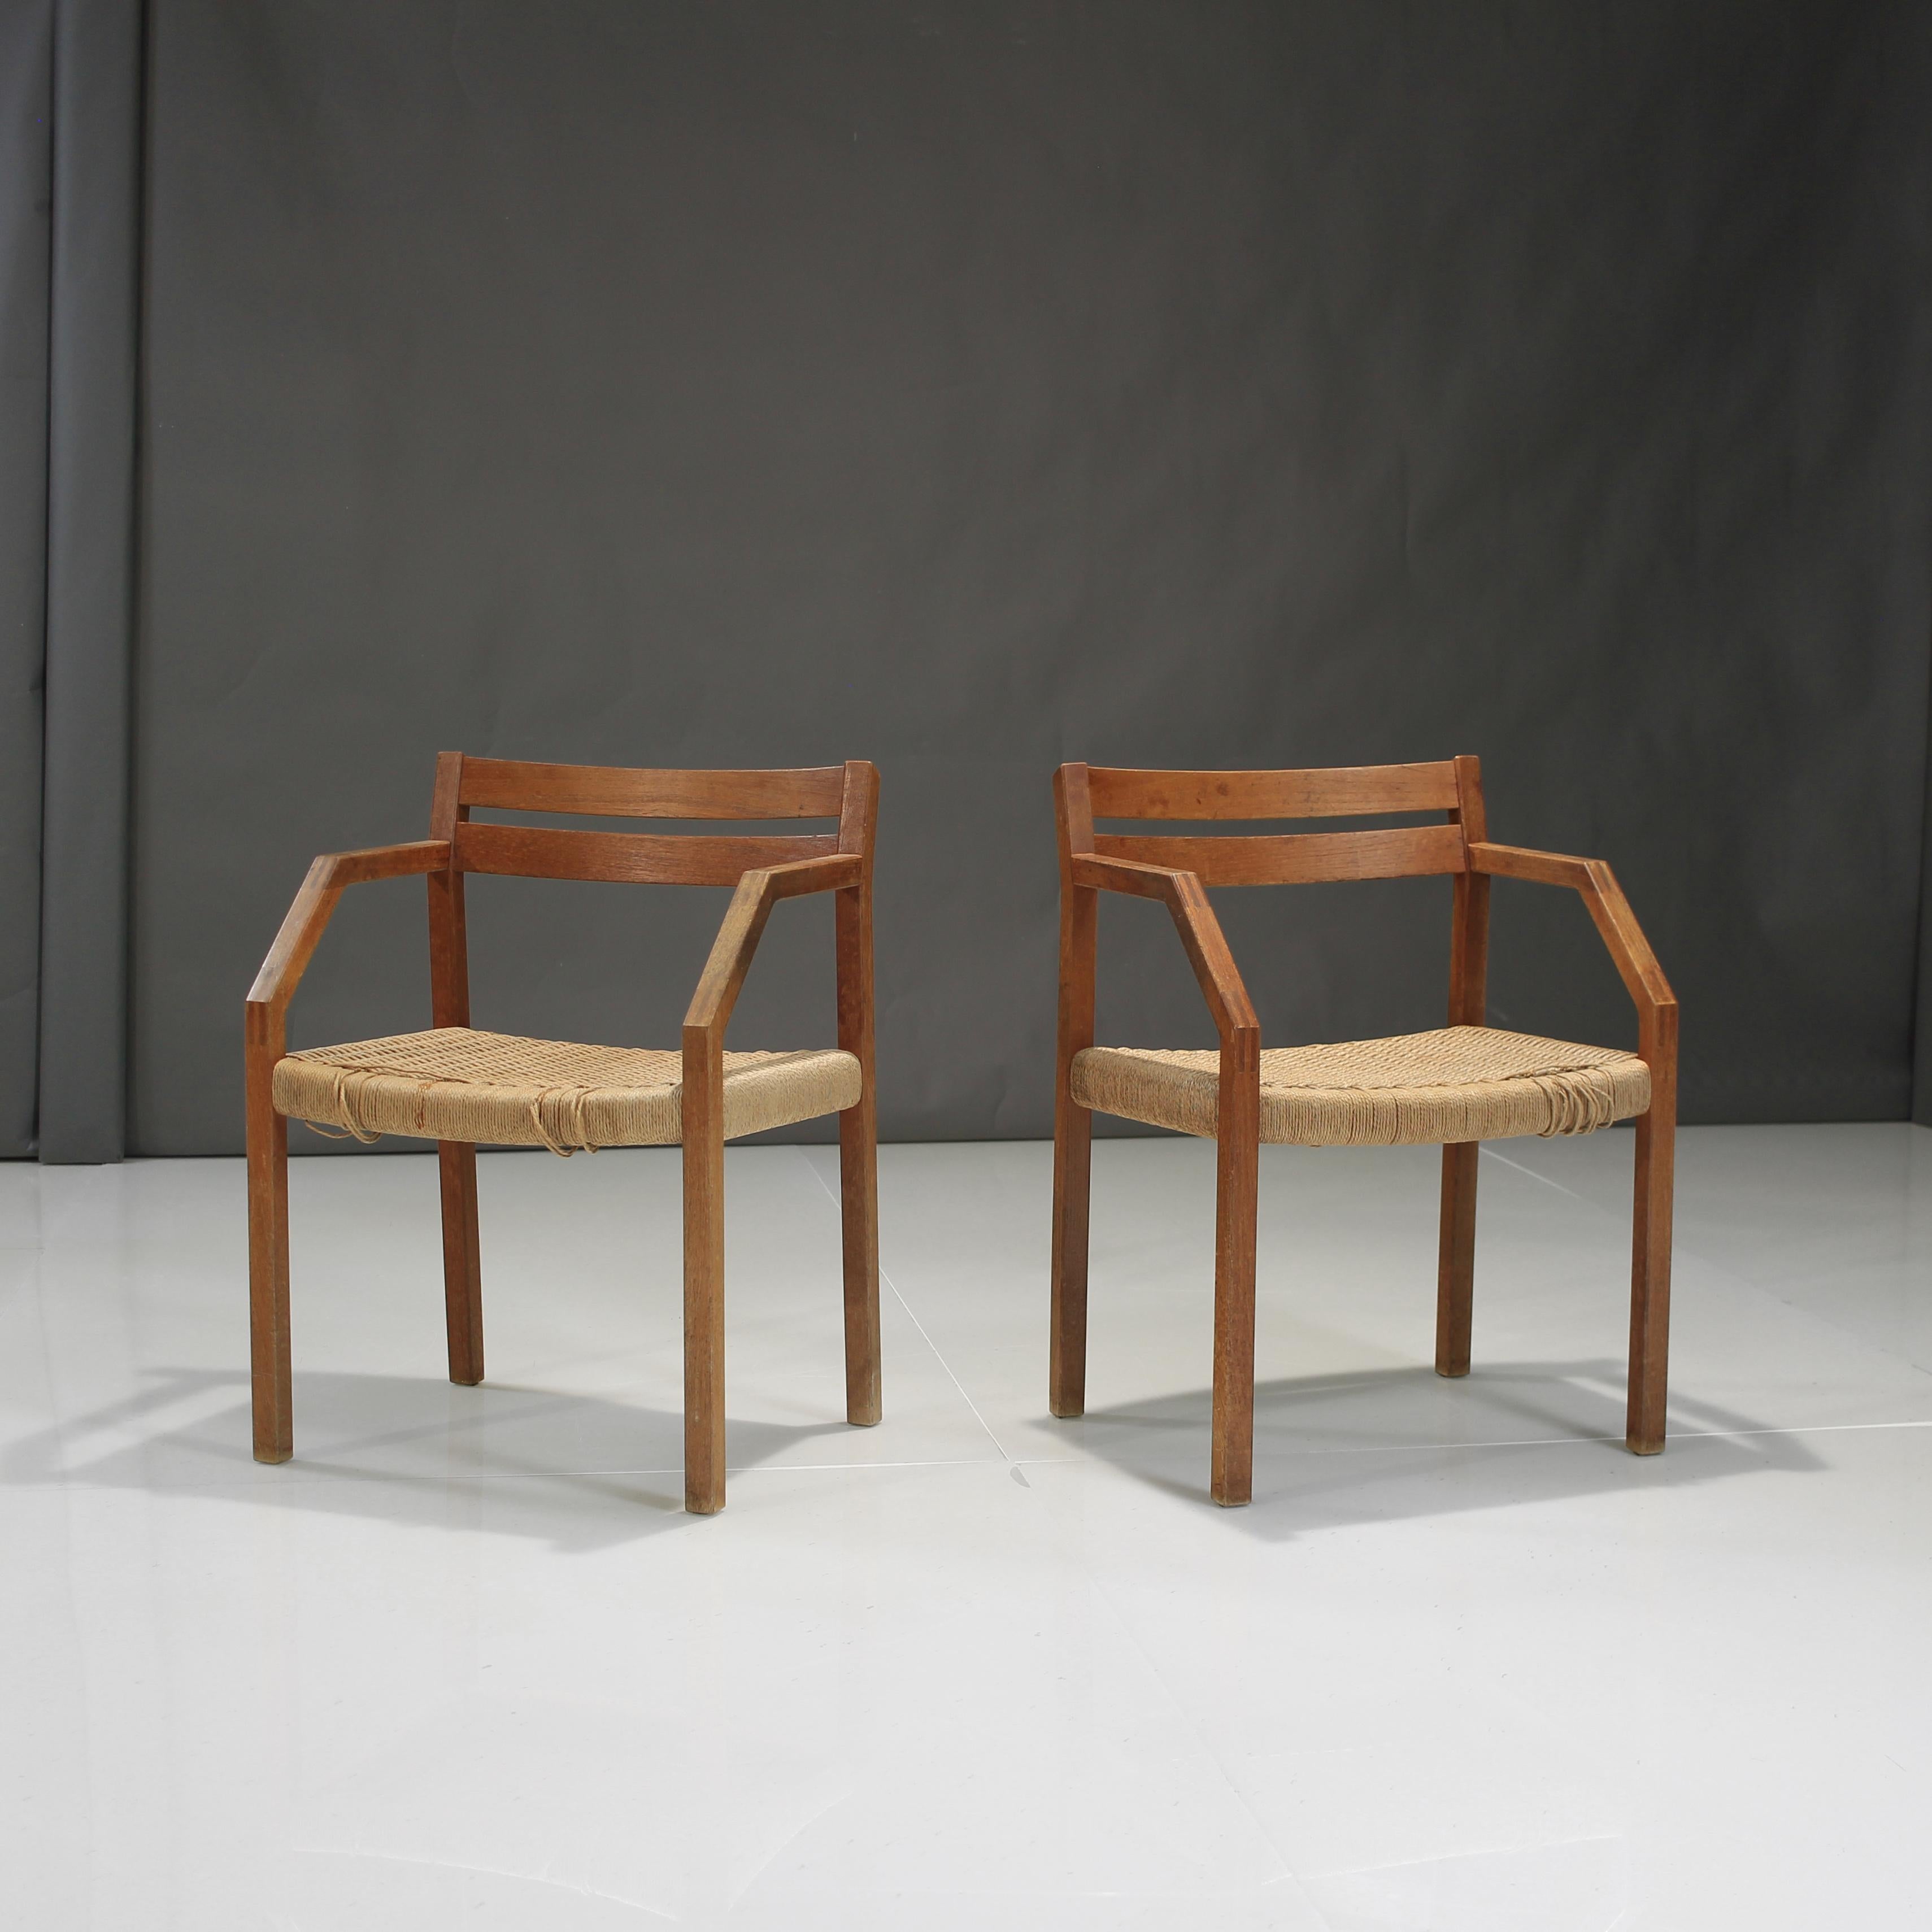 Beautiful pairing of Niels Otto Moller Model 404 Armchairs in Teak and Papercord.

Chairs are structurally sound.  Papercord has a few strands cut at ends.  The seats are otherwise in great condition, can be sat in no problem and can be used safely